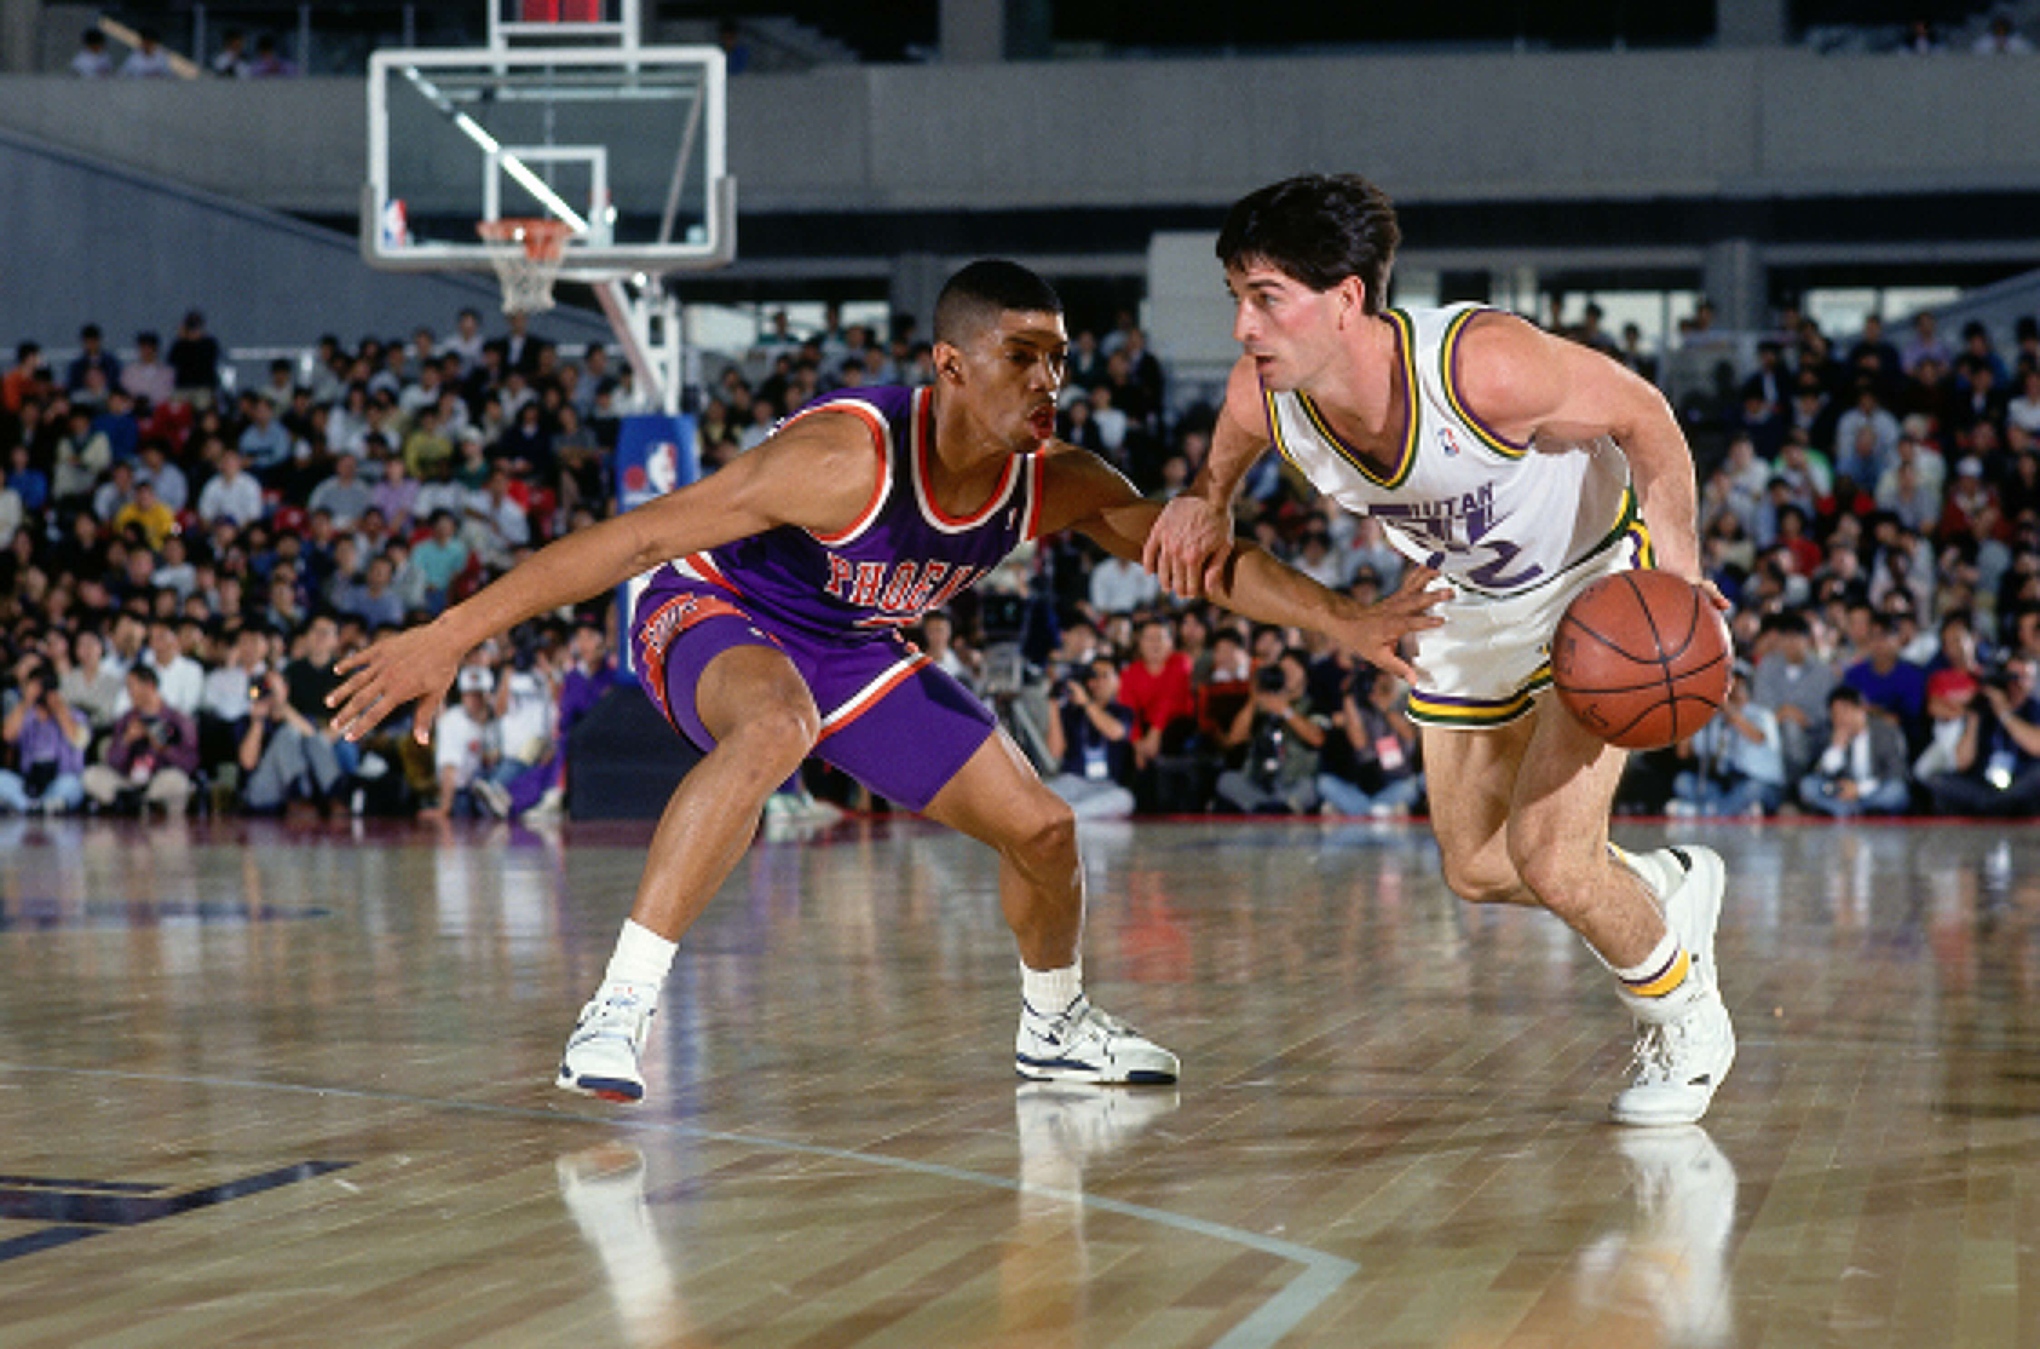 Ever notice the way point guards used to back their way down the court